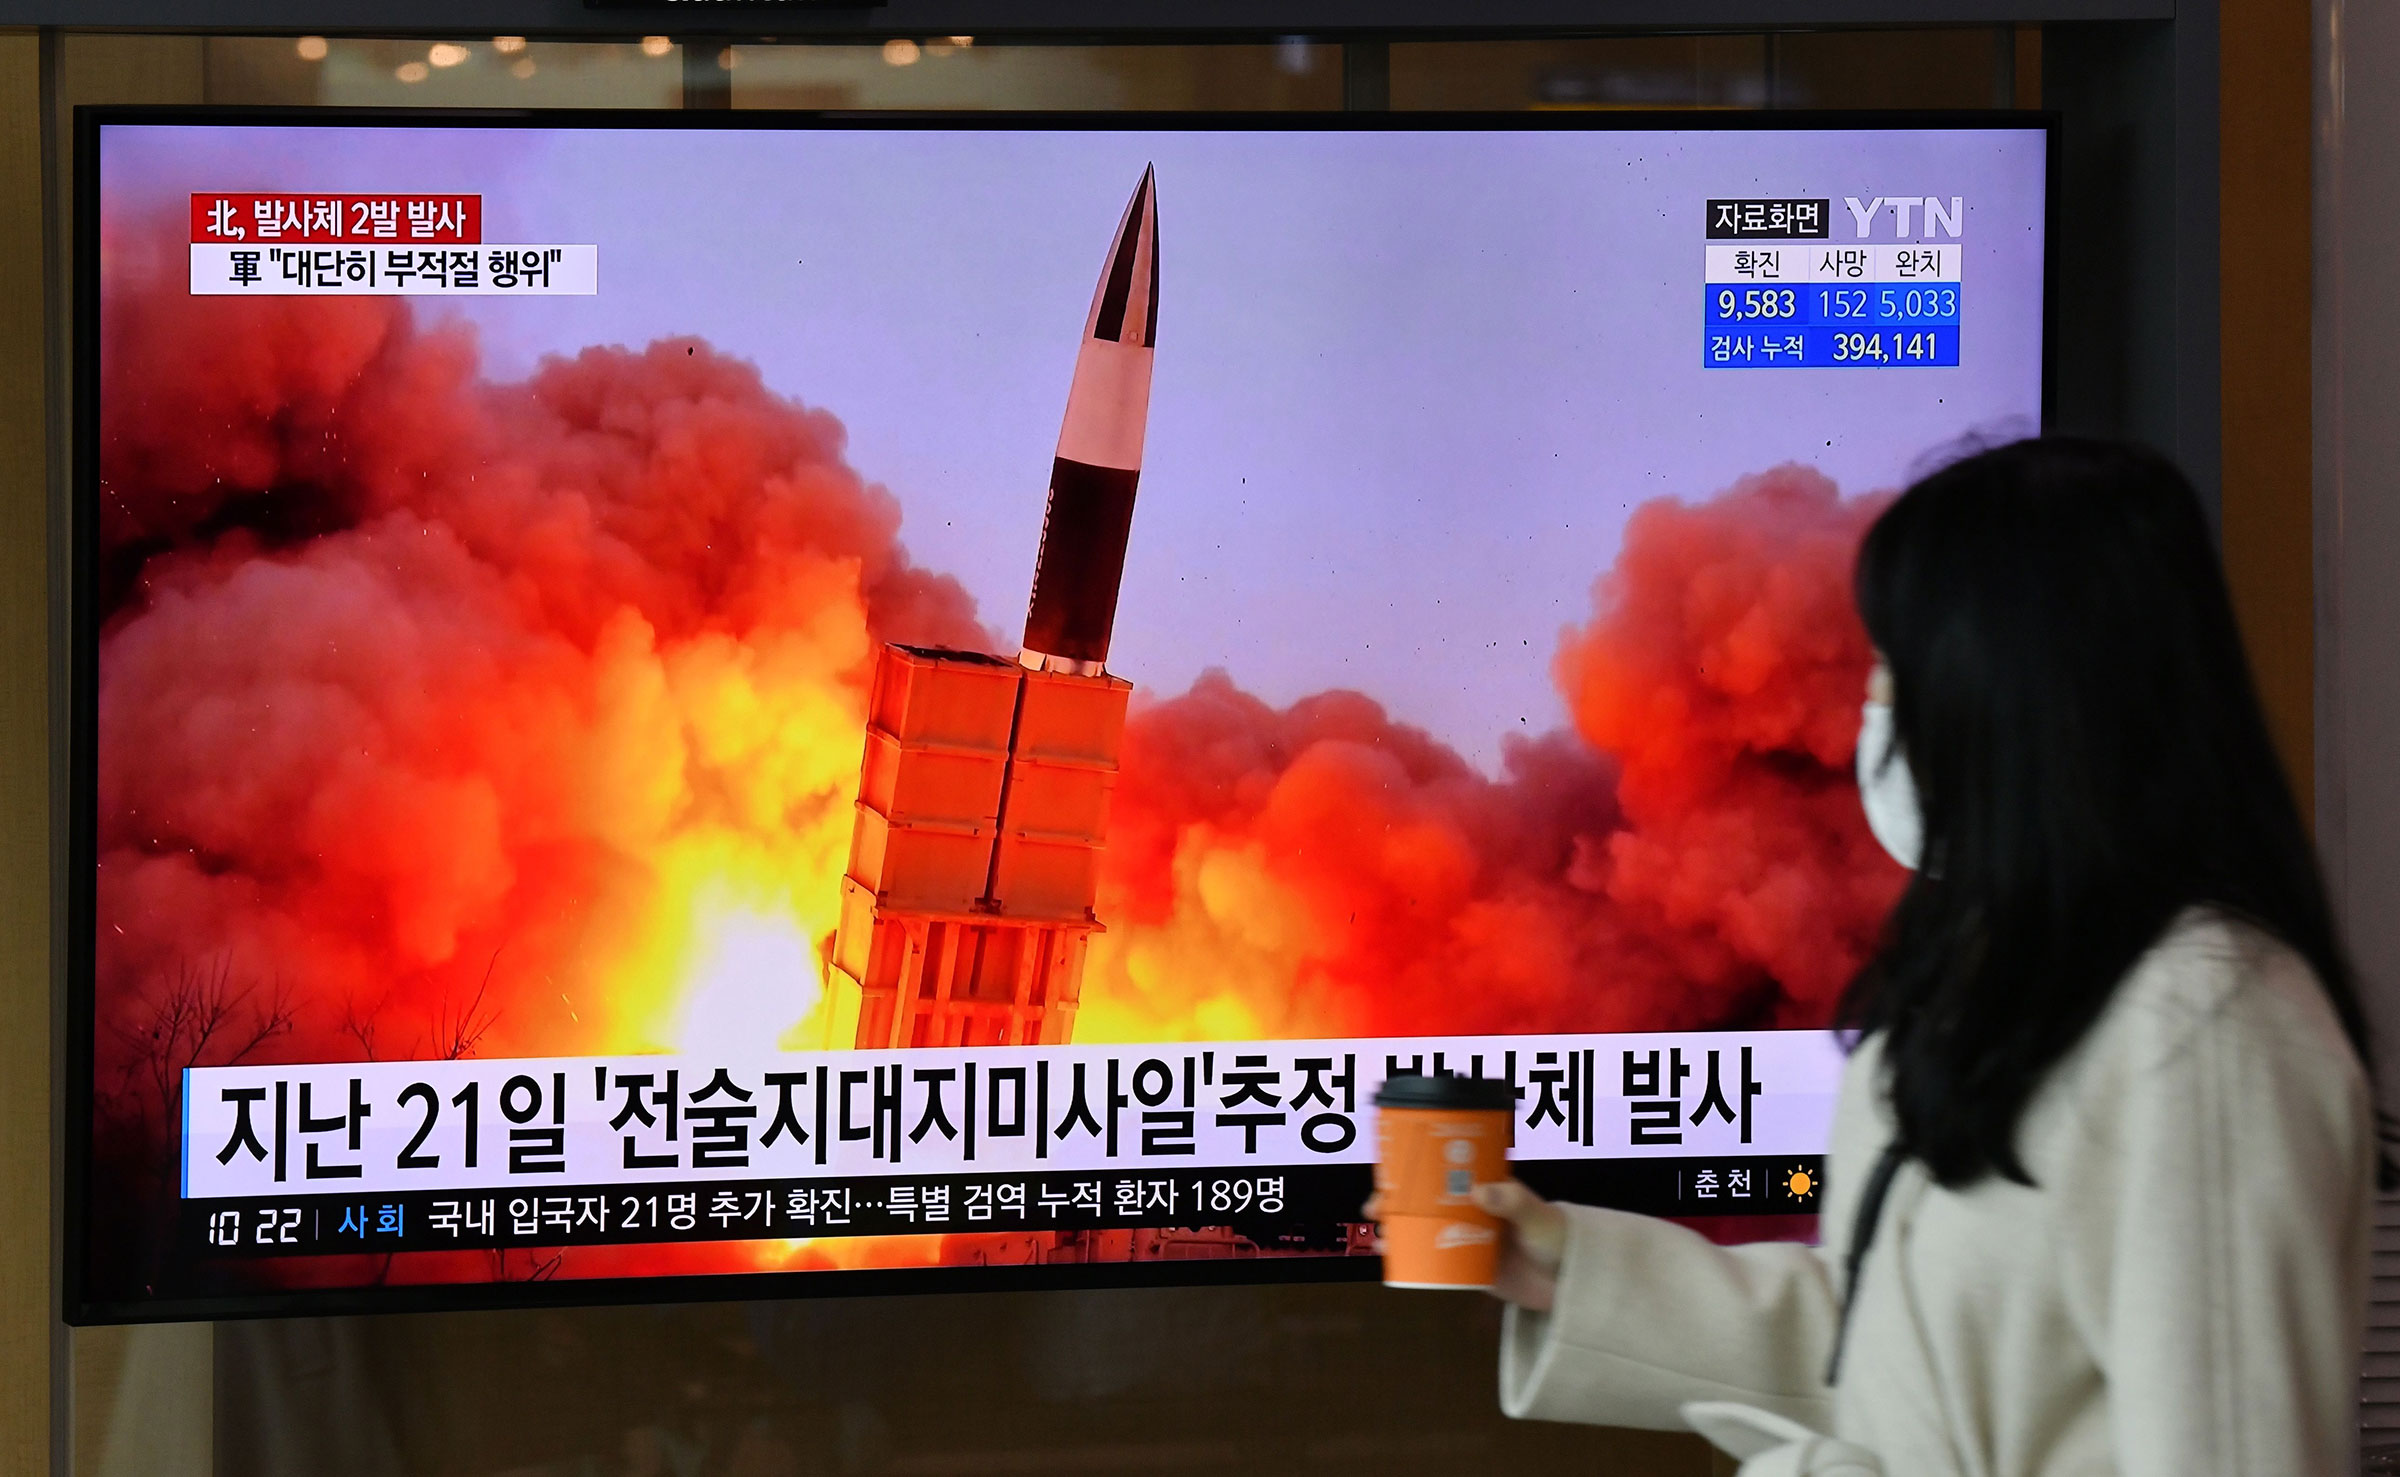 A woman walks past a screen showing file footage of a North Korean missile test, at a railway station in Seoul on March 29 (Jung Yeon-Je—AFP/Getty Images)